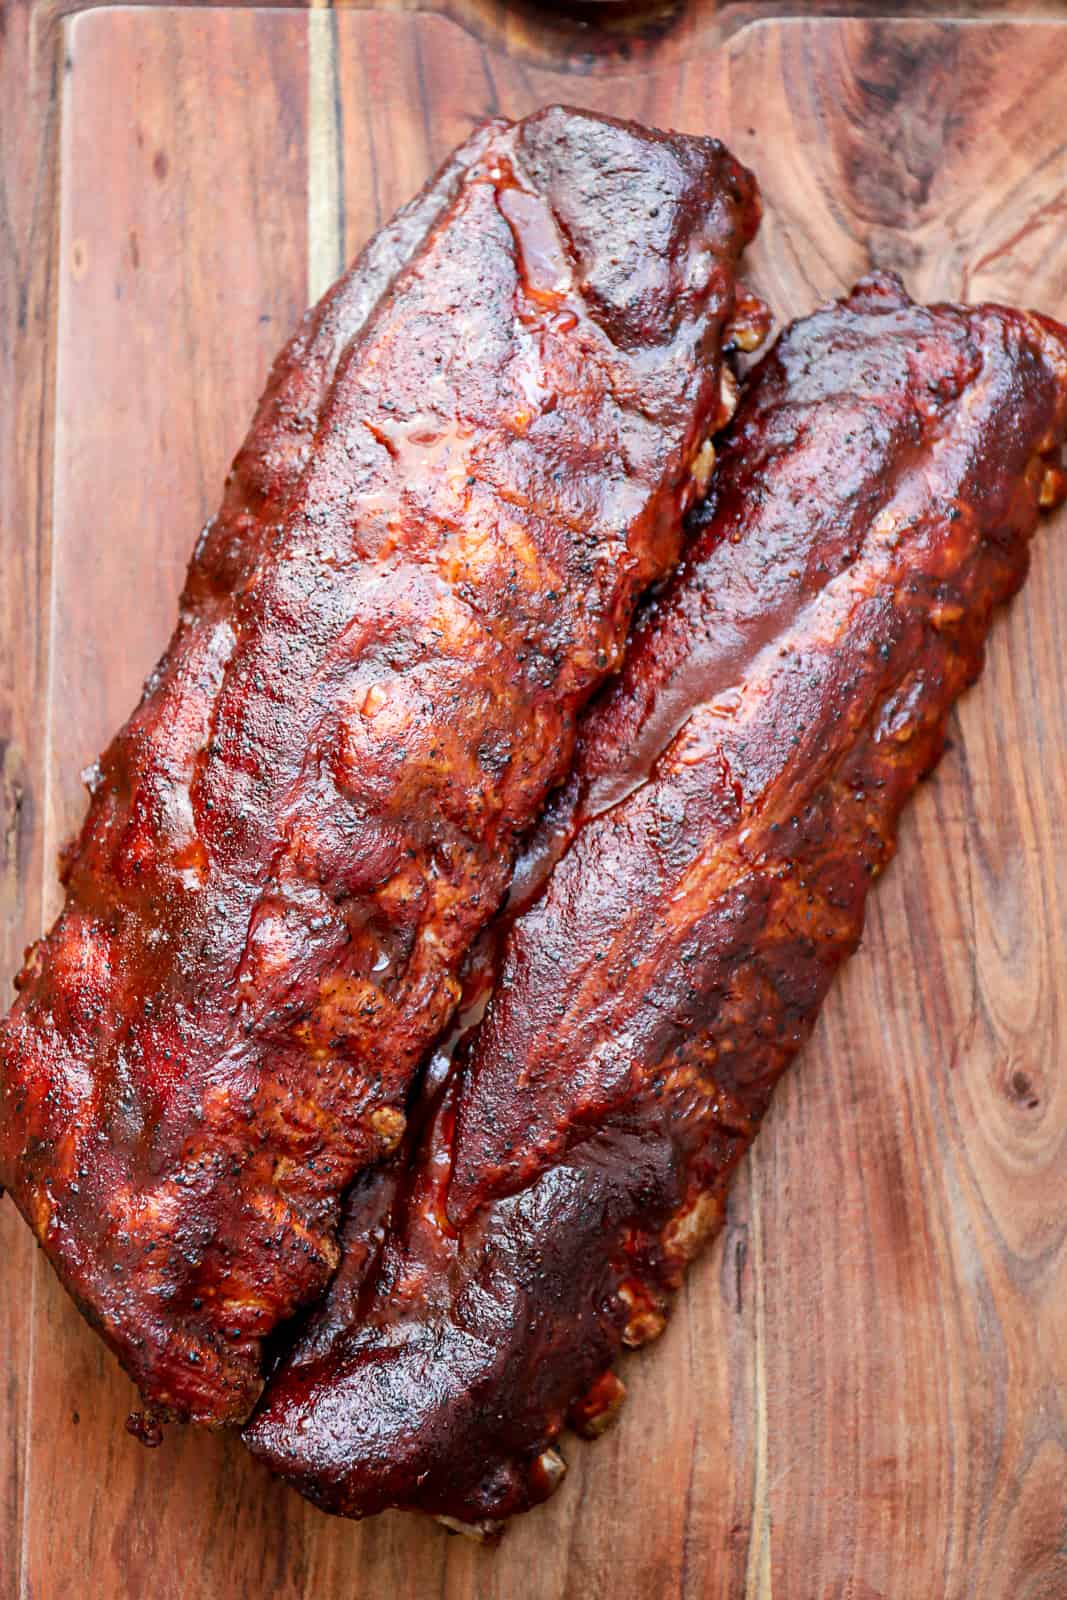 Treager Smoked 321 Ribs with BBQ sauce on a cutting board